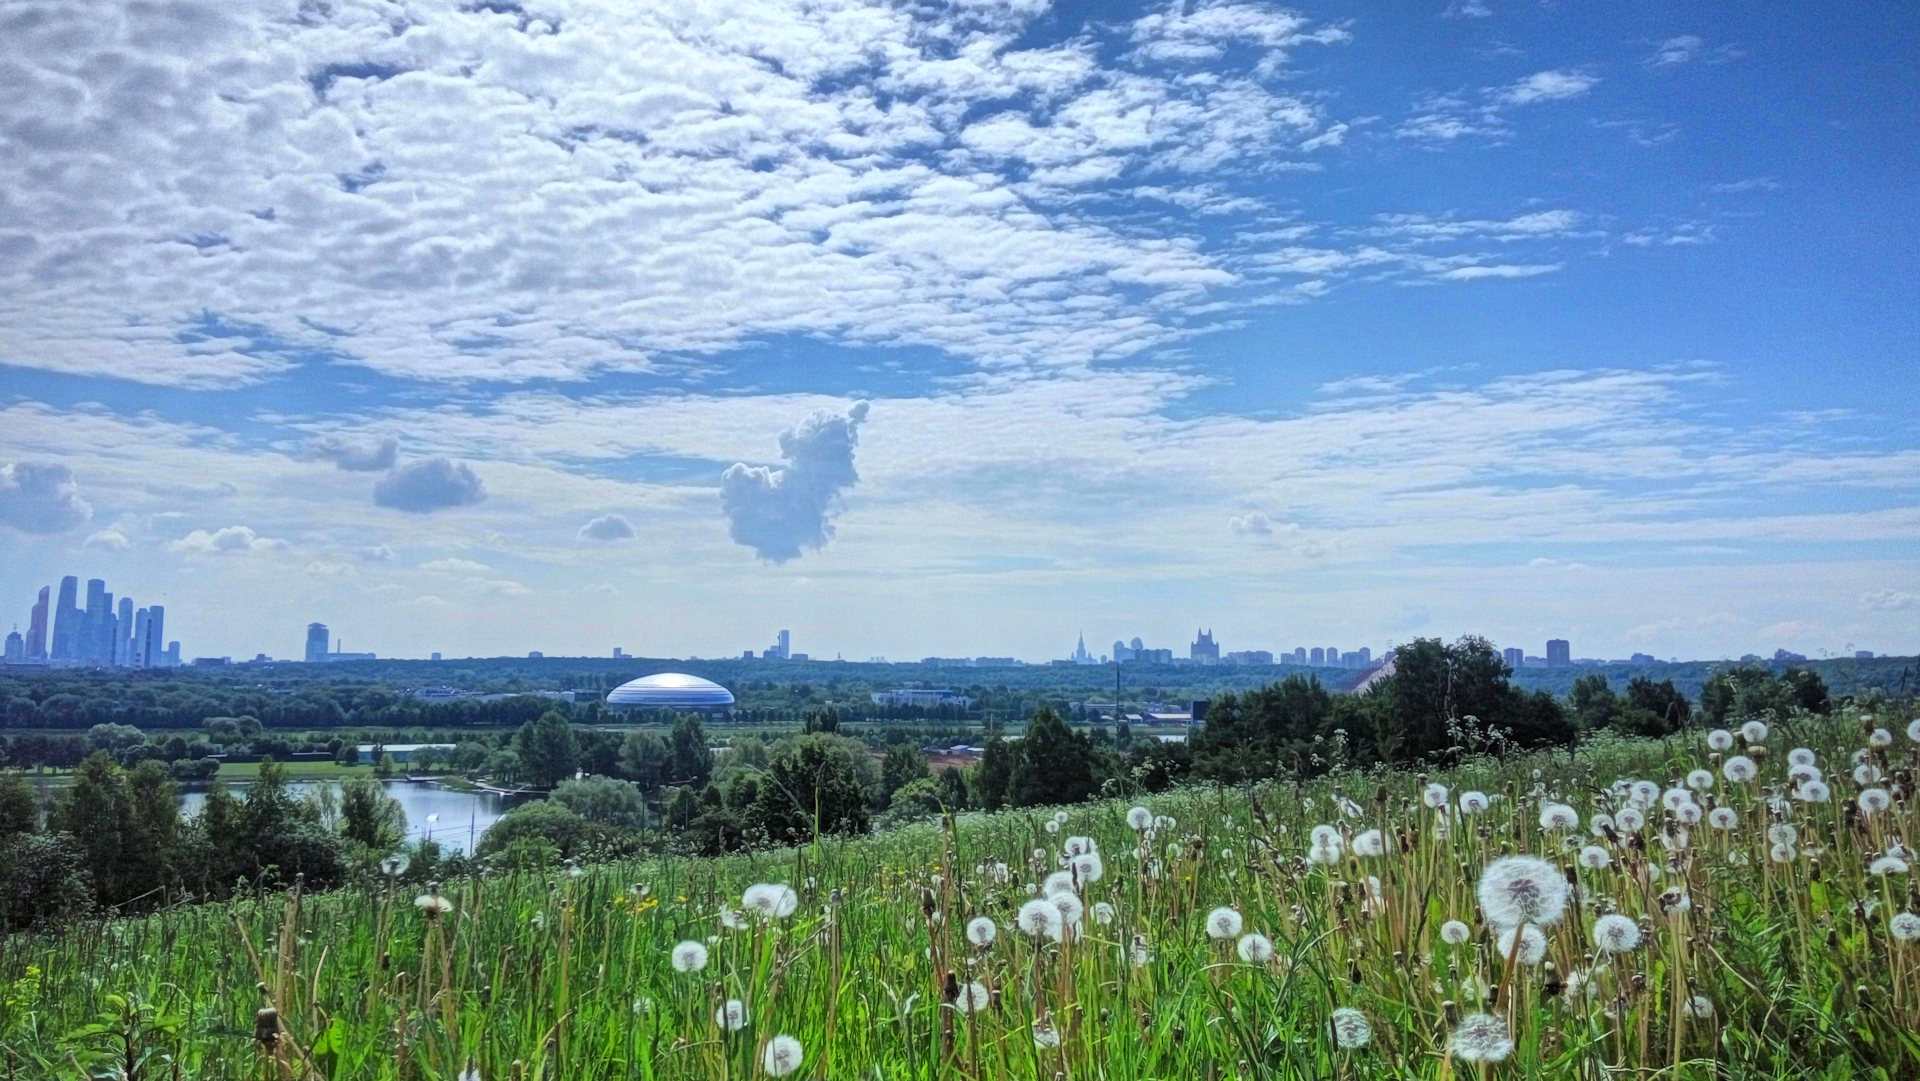 Landscape Cityscape Summer Dandelion Grass Moscow Moscow City Sky Clouds 1920x1081